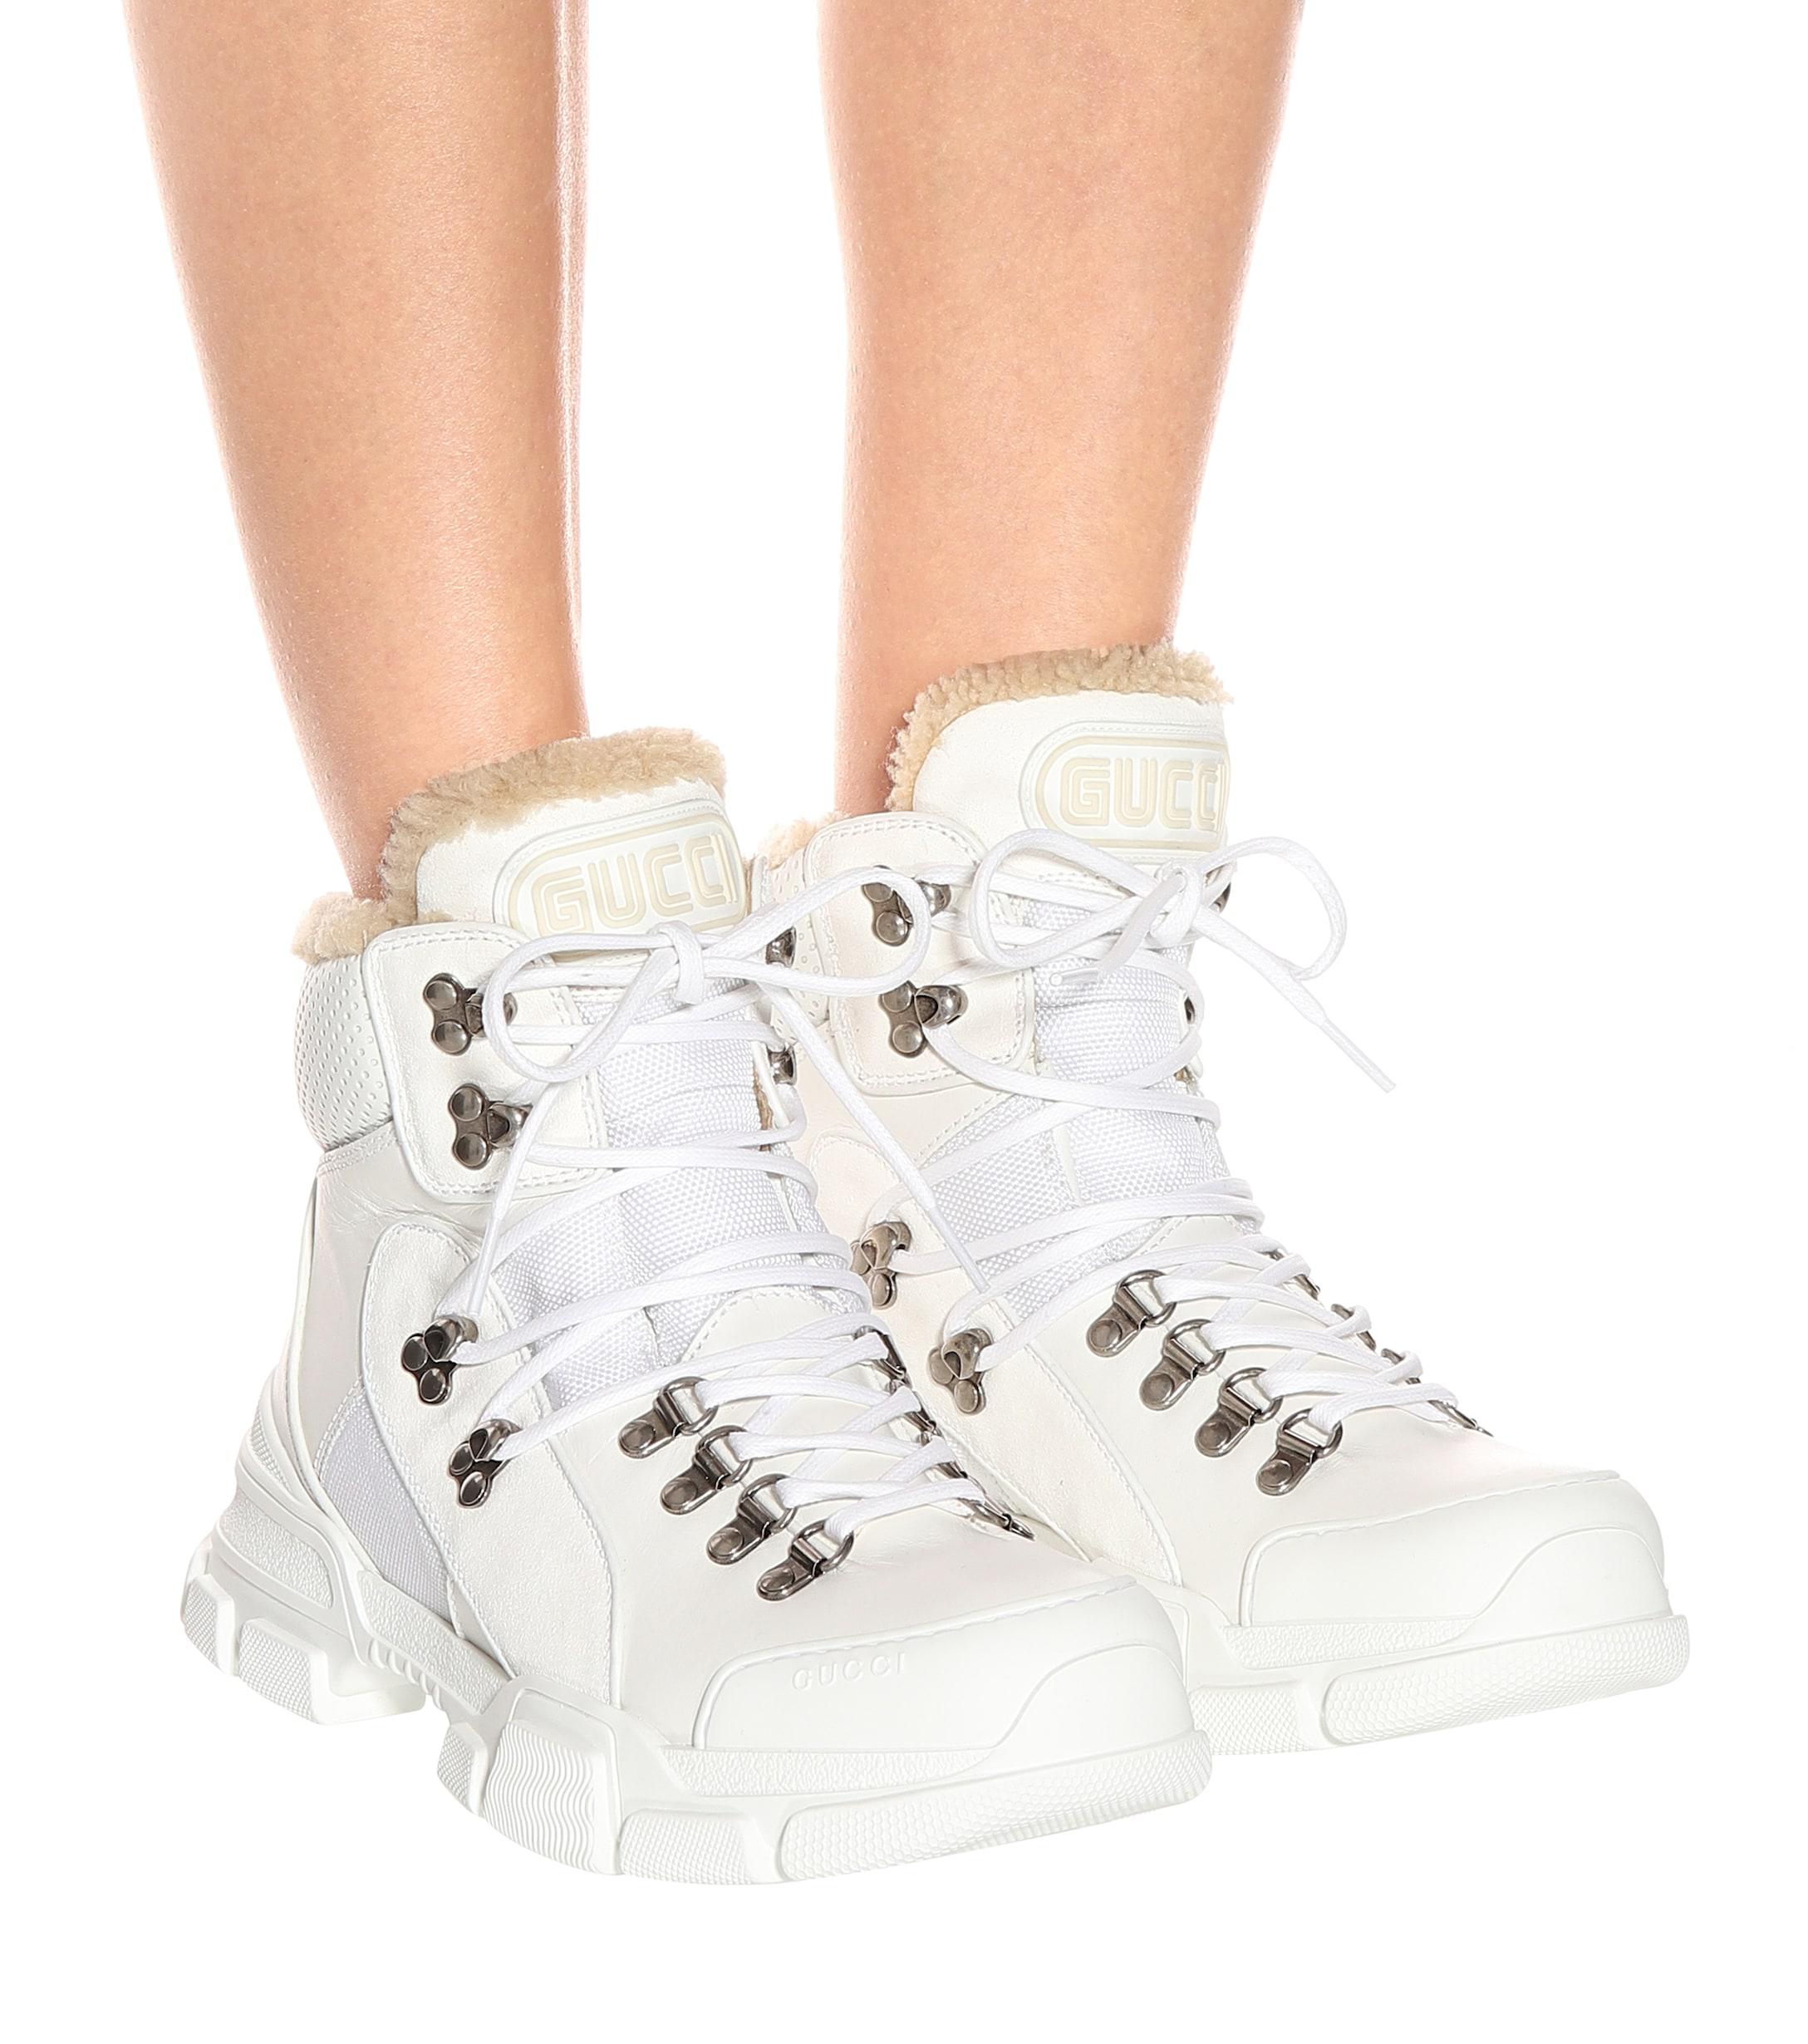 Gucci Flashtrek High-top Leather Sneakers in White - Lyst